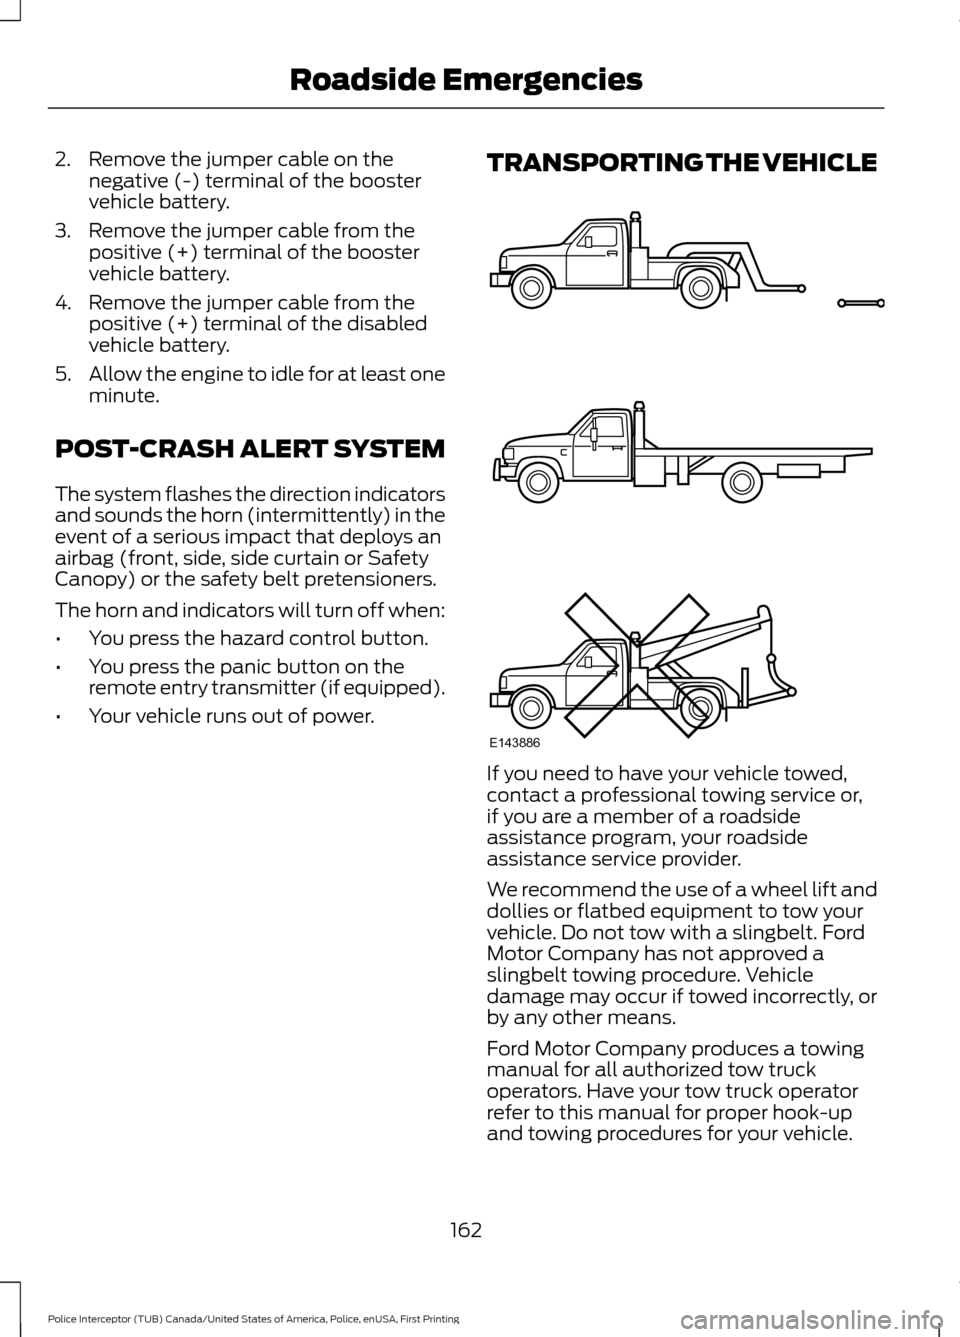 FORD POLICE INTERCEPTOR UTILITY 2017 1.G User Guide 2. Remove the jumper cable on the
negative (-) terminal of the booster
vehicle battery.
3. Remove the jumper cable from the positive (+) terminal of the booster
vehicle battery.
4. Remove the jumper c